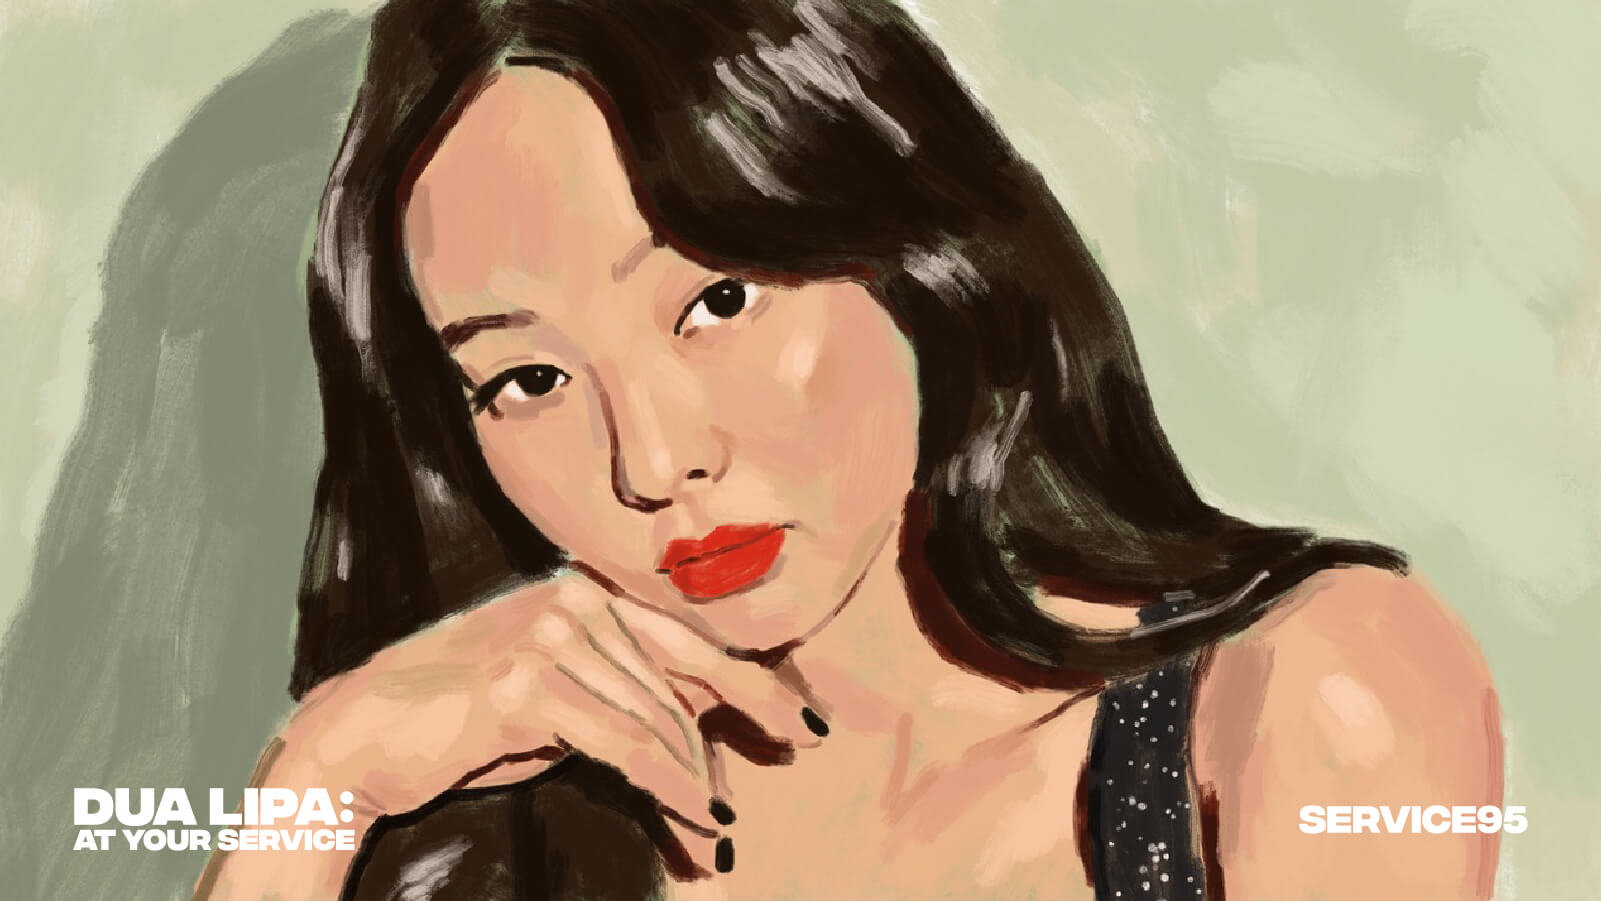 Illustrated portrait of Jennie from BLACKPINK by Sam Kerr